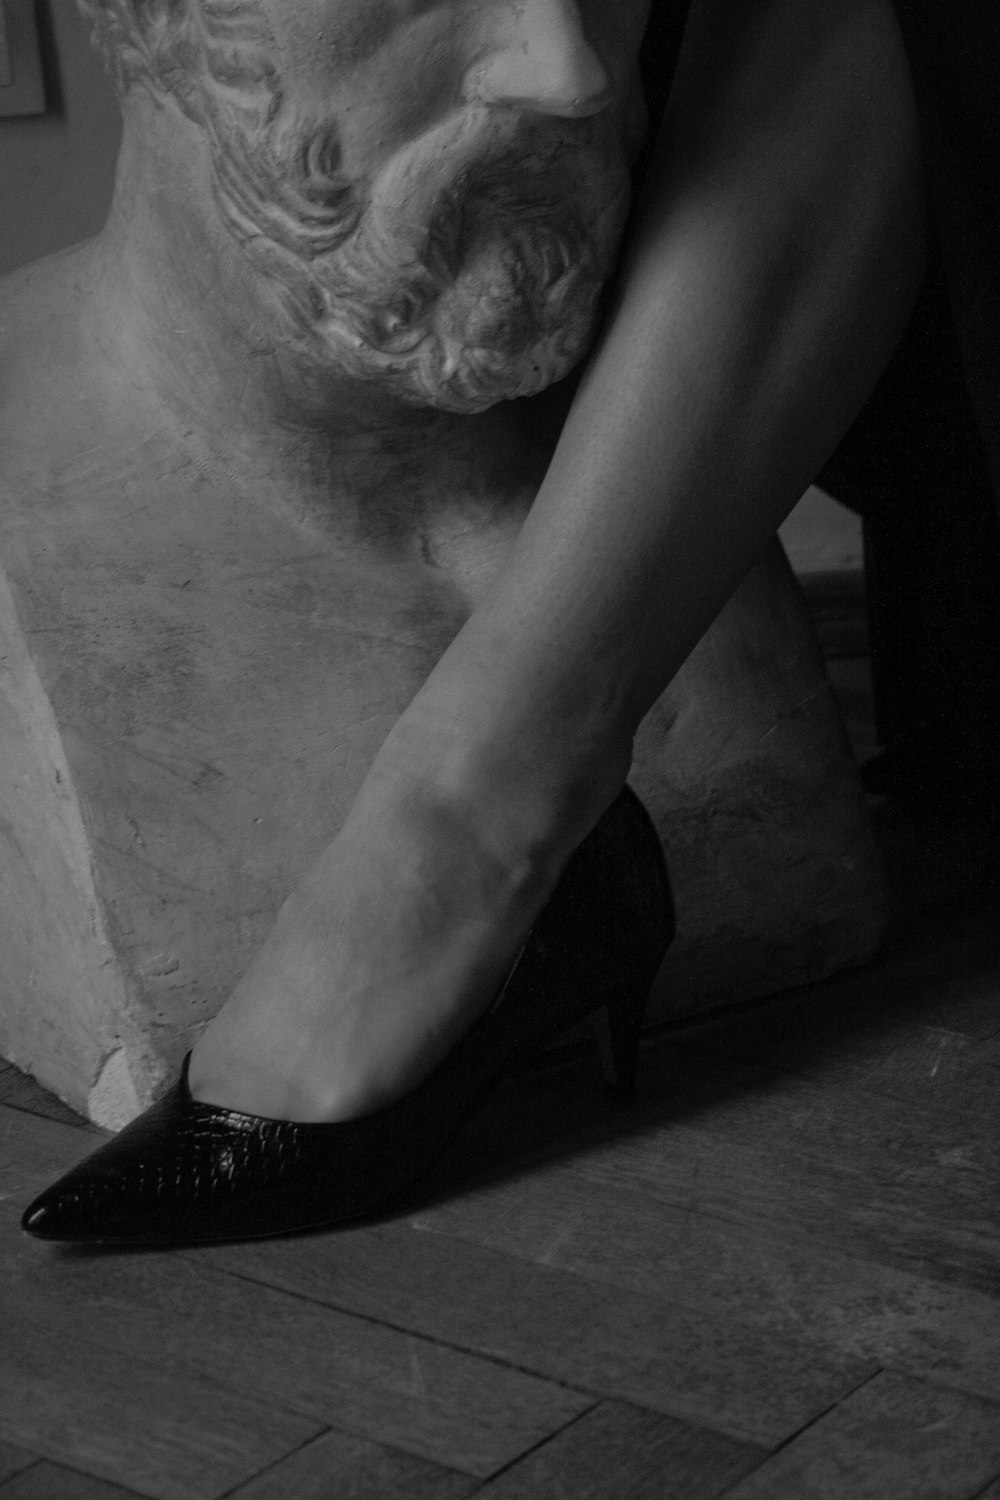 a black and white photo of a woman's legs and shoes